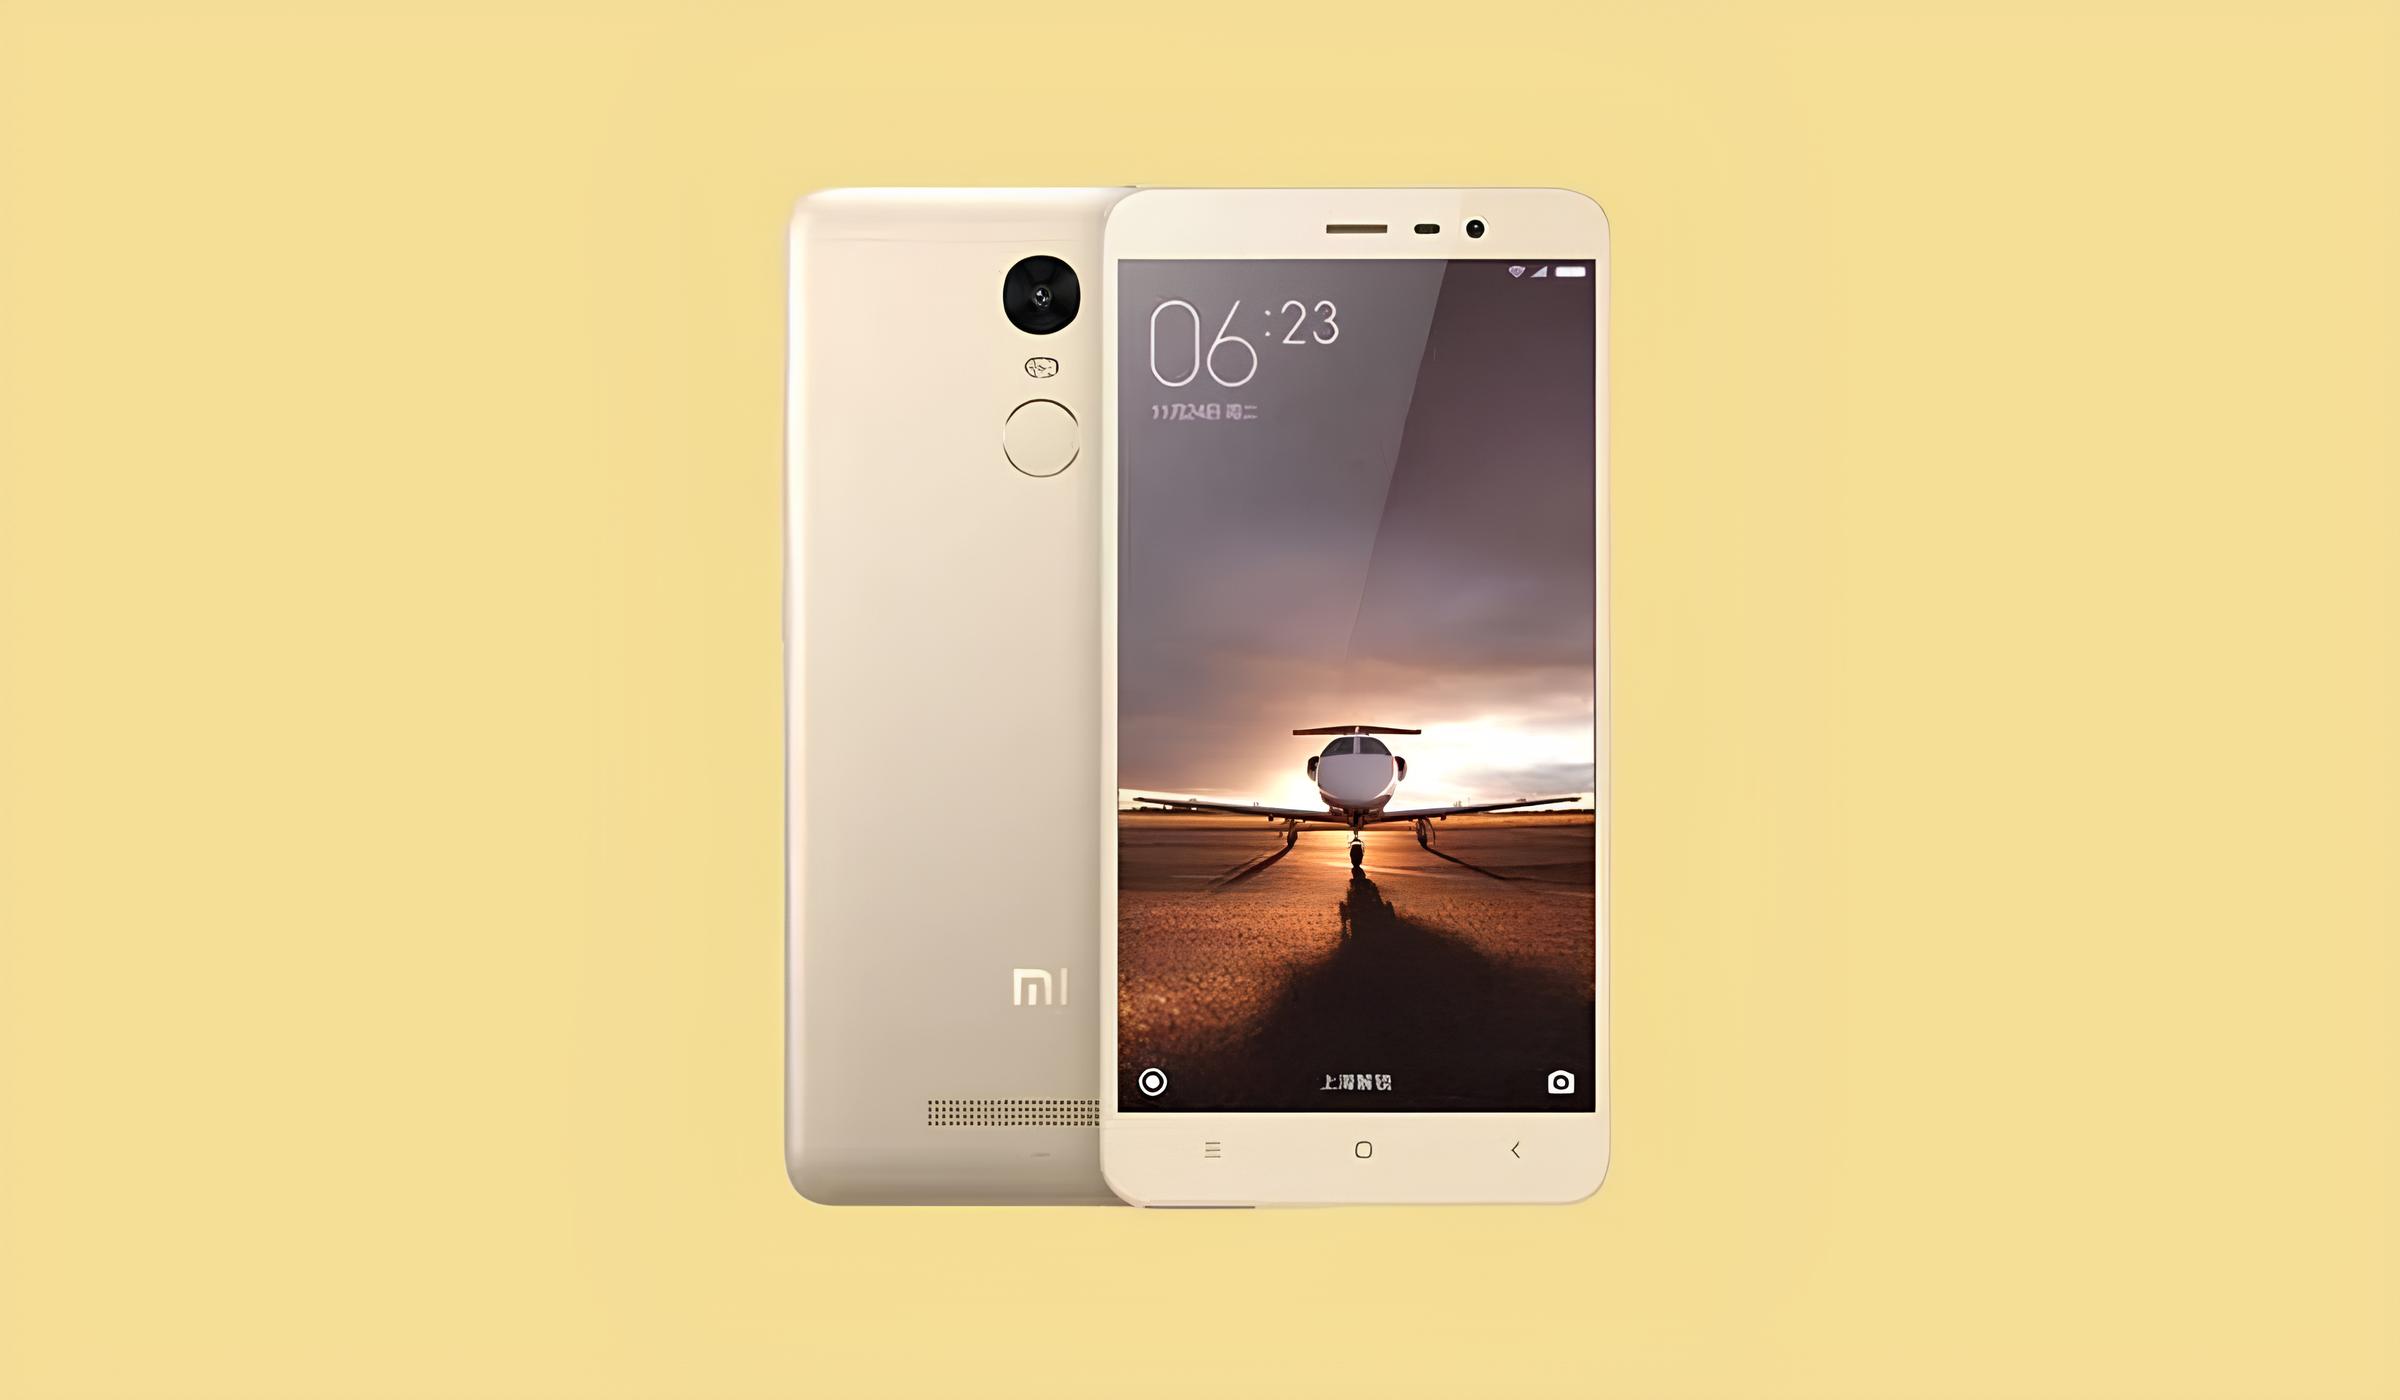 redmi-note-3-rom-installation-step-by-step-guide